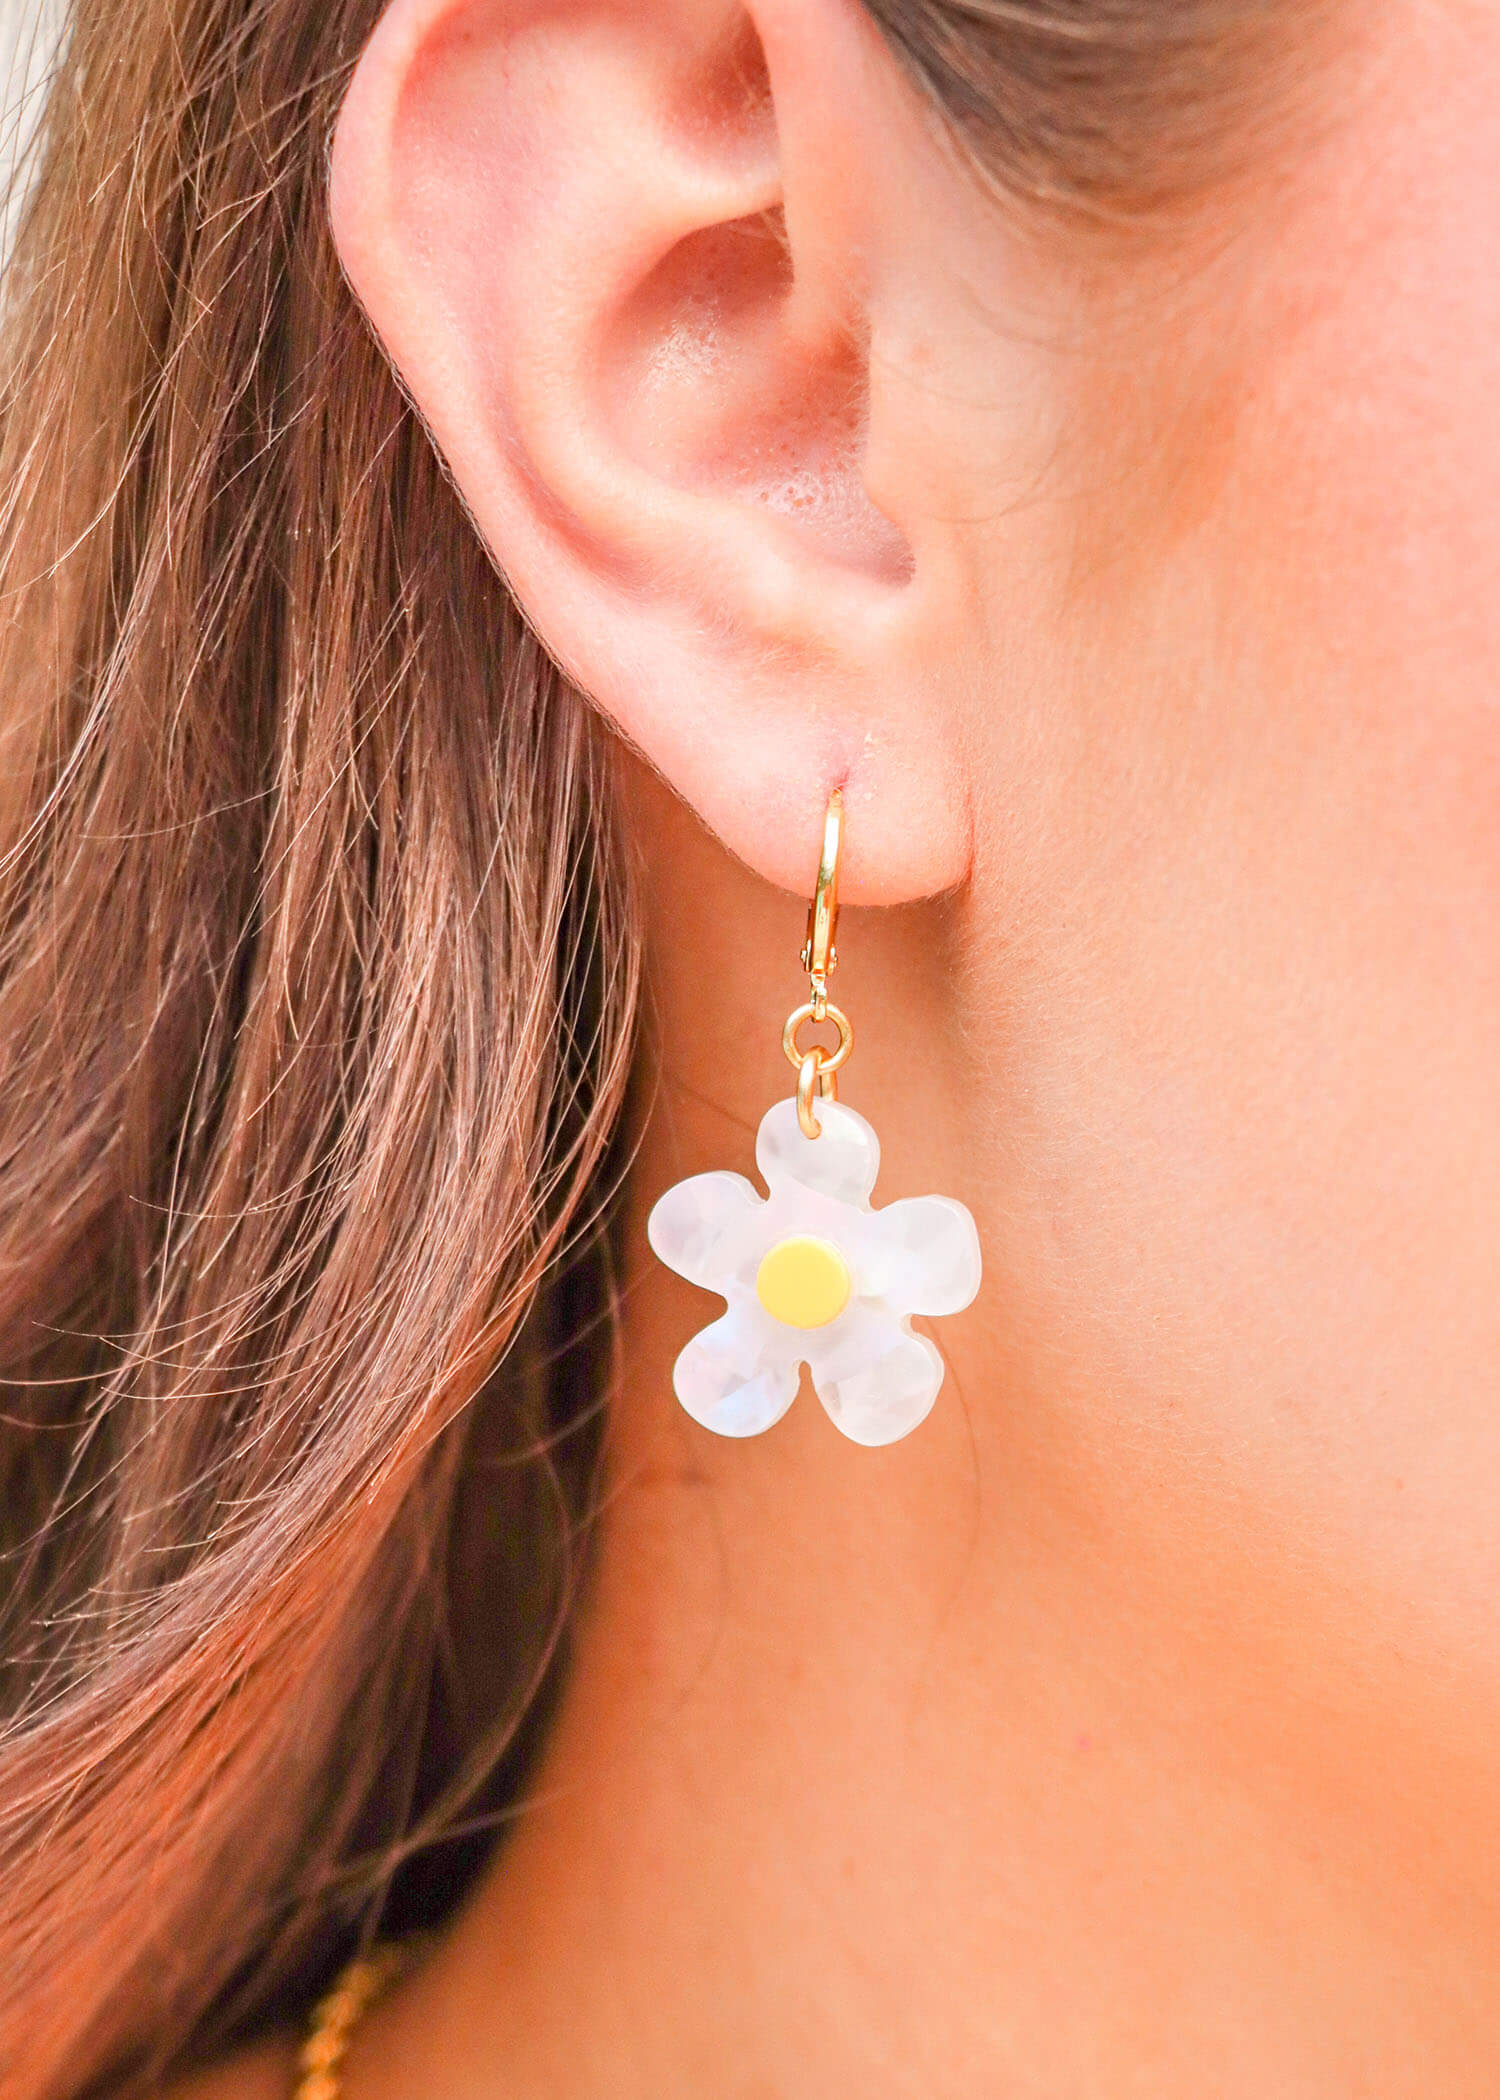 Picking Daisies Earrings - Gold/White Earrings MerciGrace Boutique.